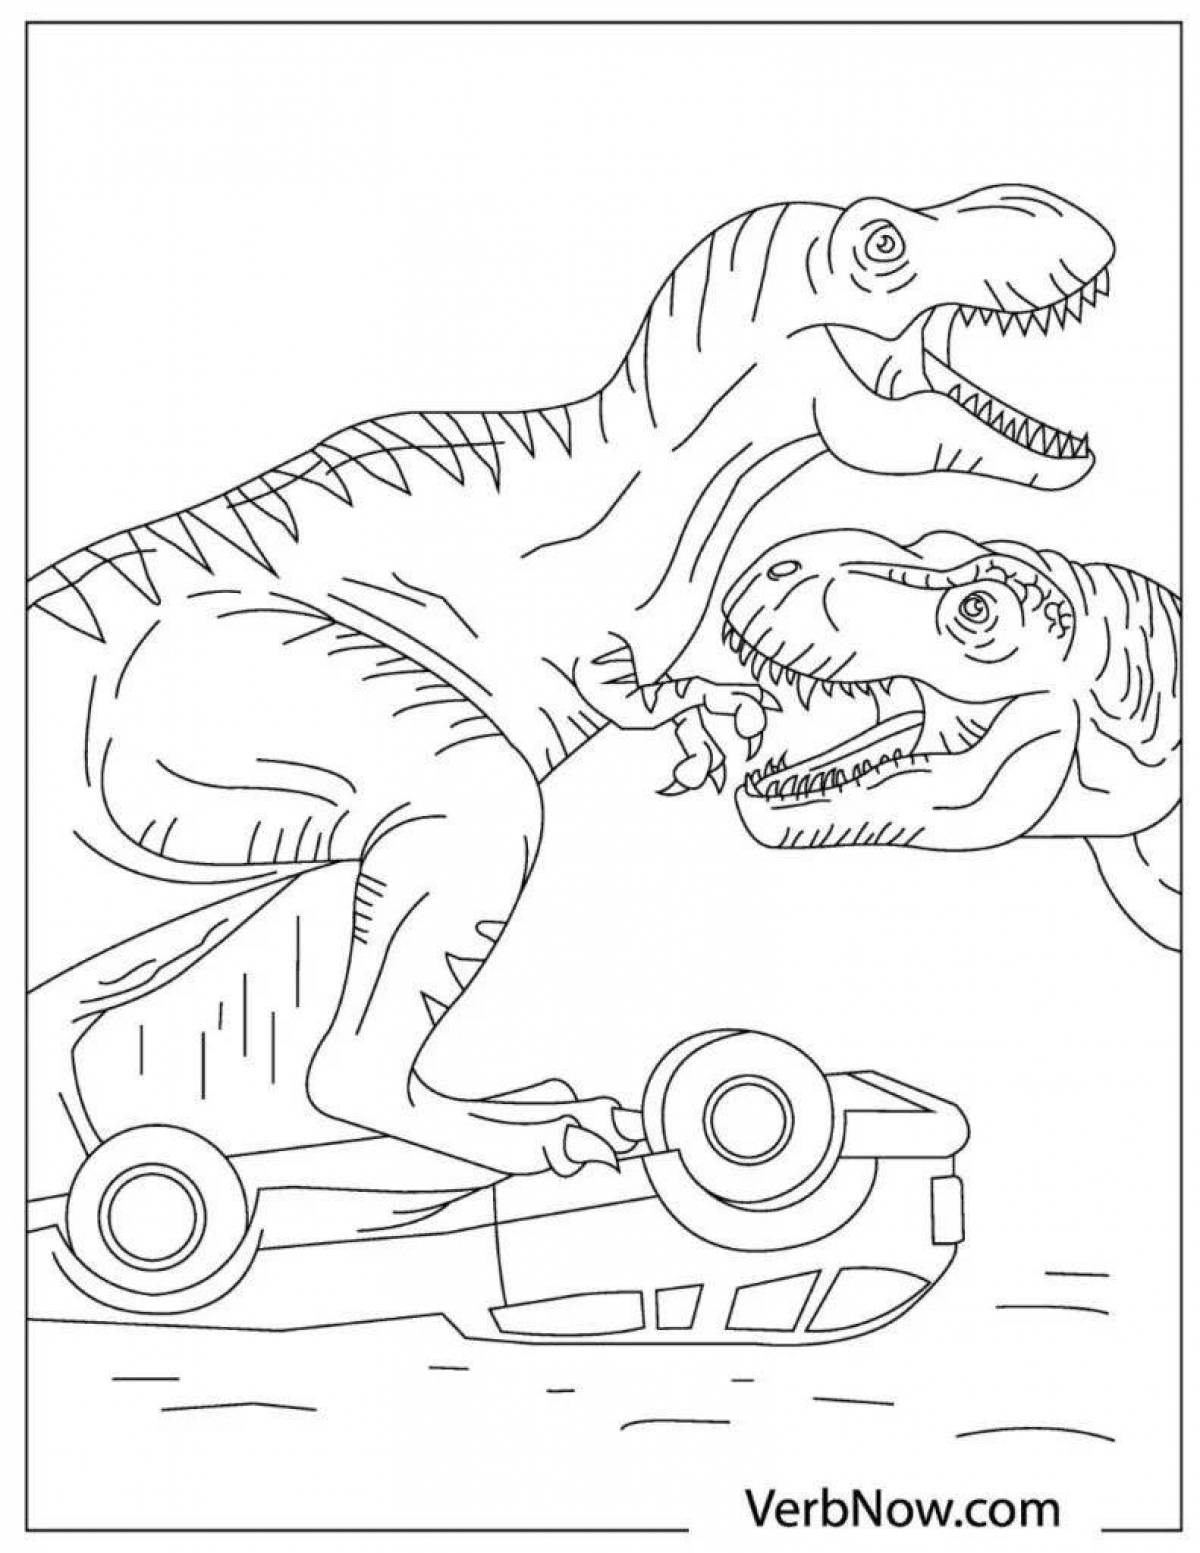 Radiant lego jurassic coloring book